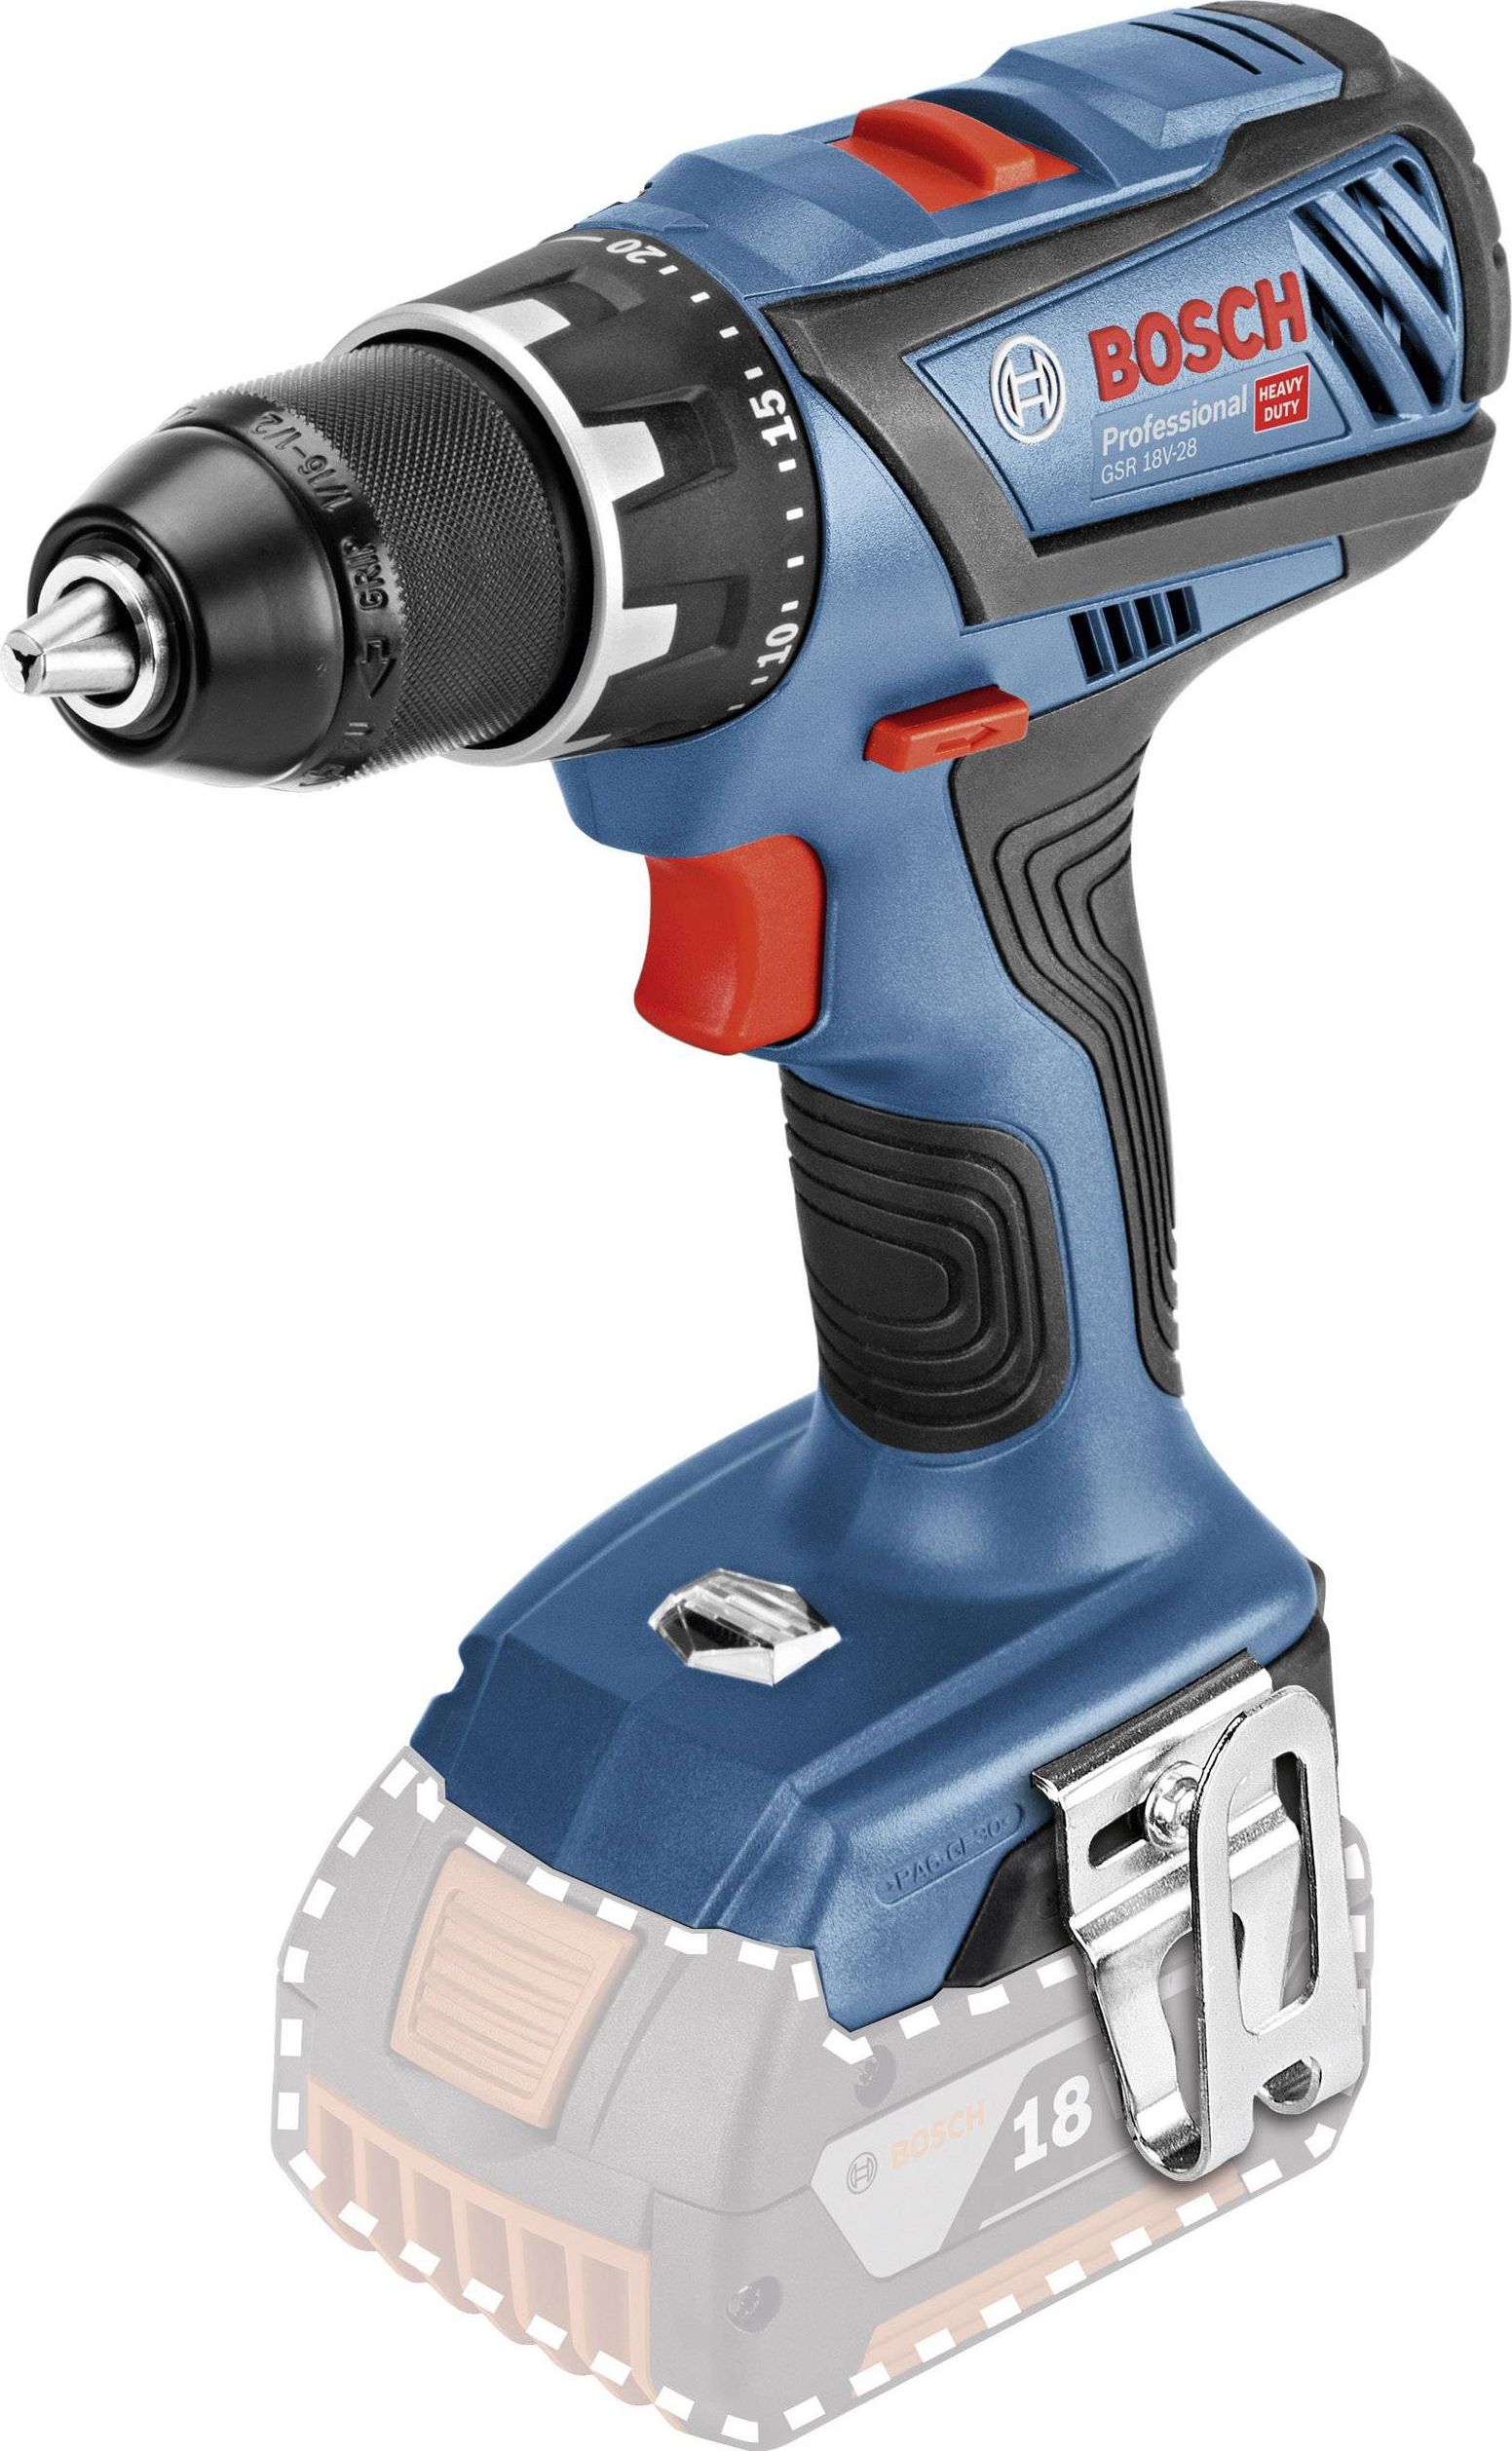 Bosch cordless drill GSR 18V-28 Professional solo, 18 Volt (blue / black, without battery and charger)